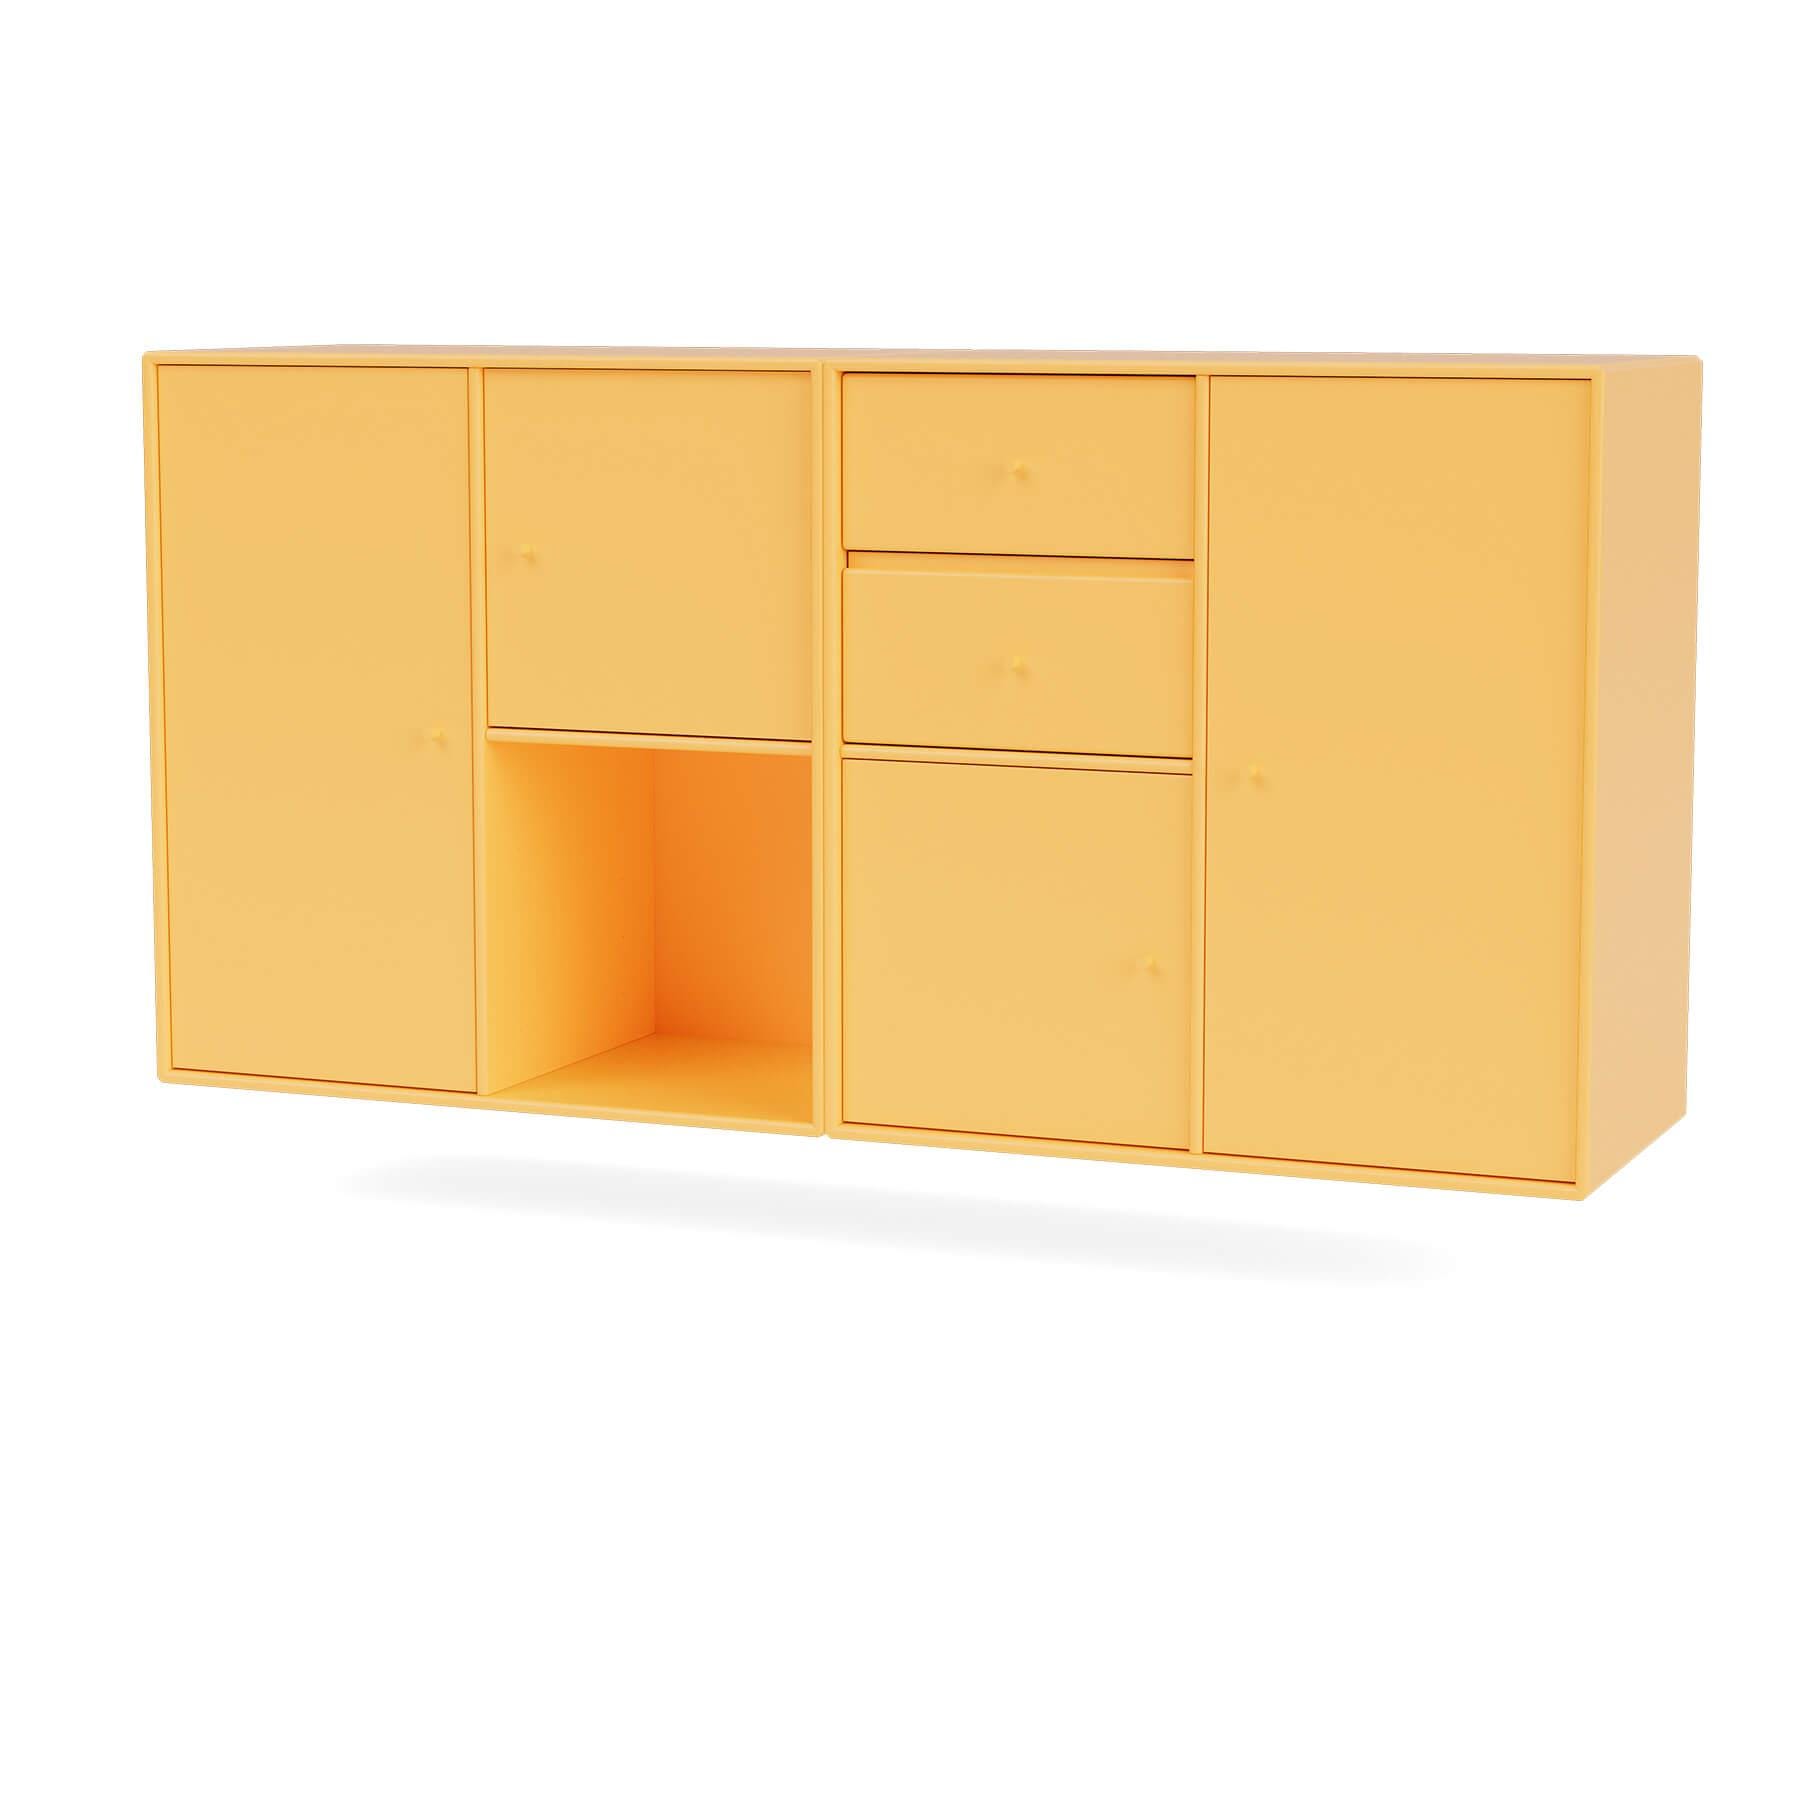 Montana Couple Sideboard Acacia Wall Mounted Yellow Designer Furniture From Holloways Of Ludlow